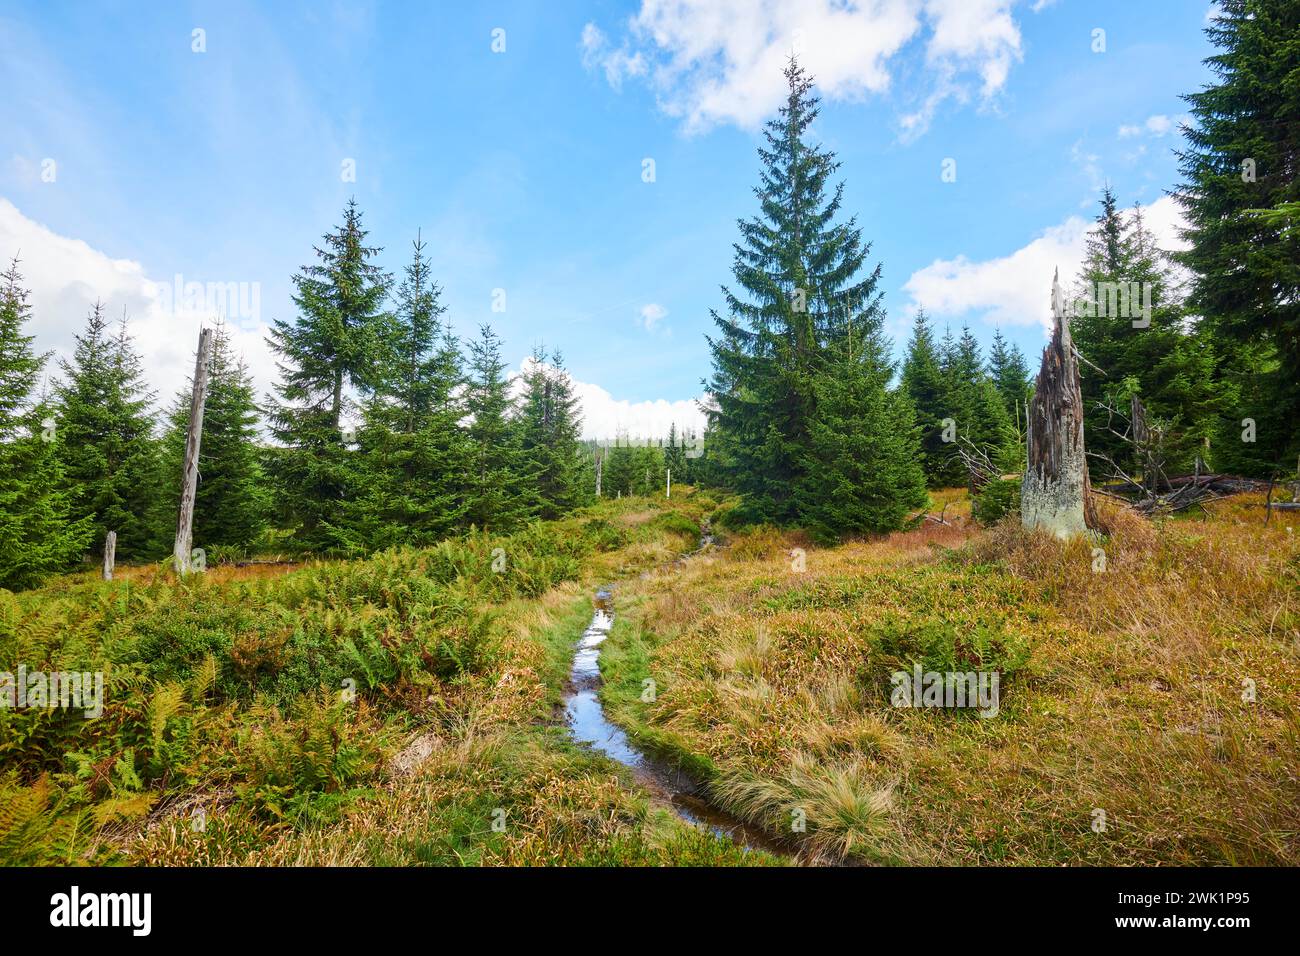 Vegetation with Norway spruce (Picea abies), colored European blueberry (Vaccinium myrtillus) and male fern (Dryopteris filix-mas) on Mount Lusen in Stock Photo